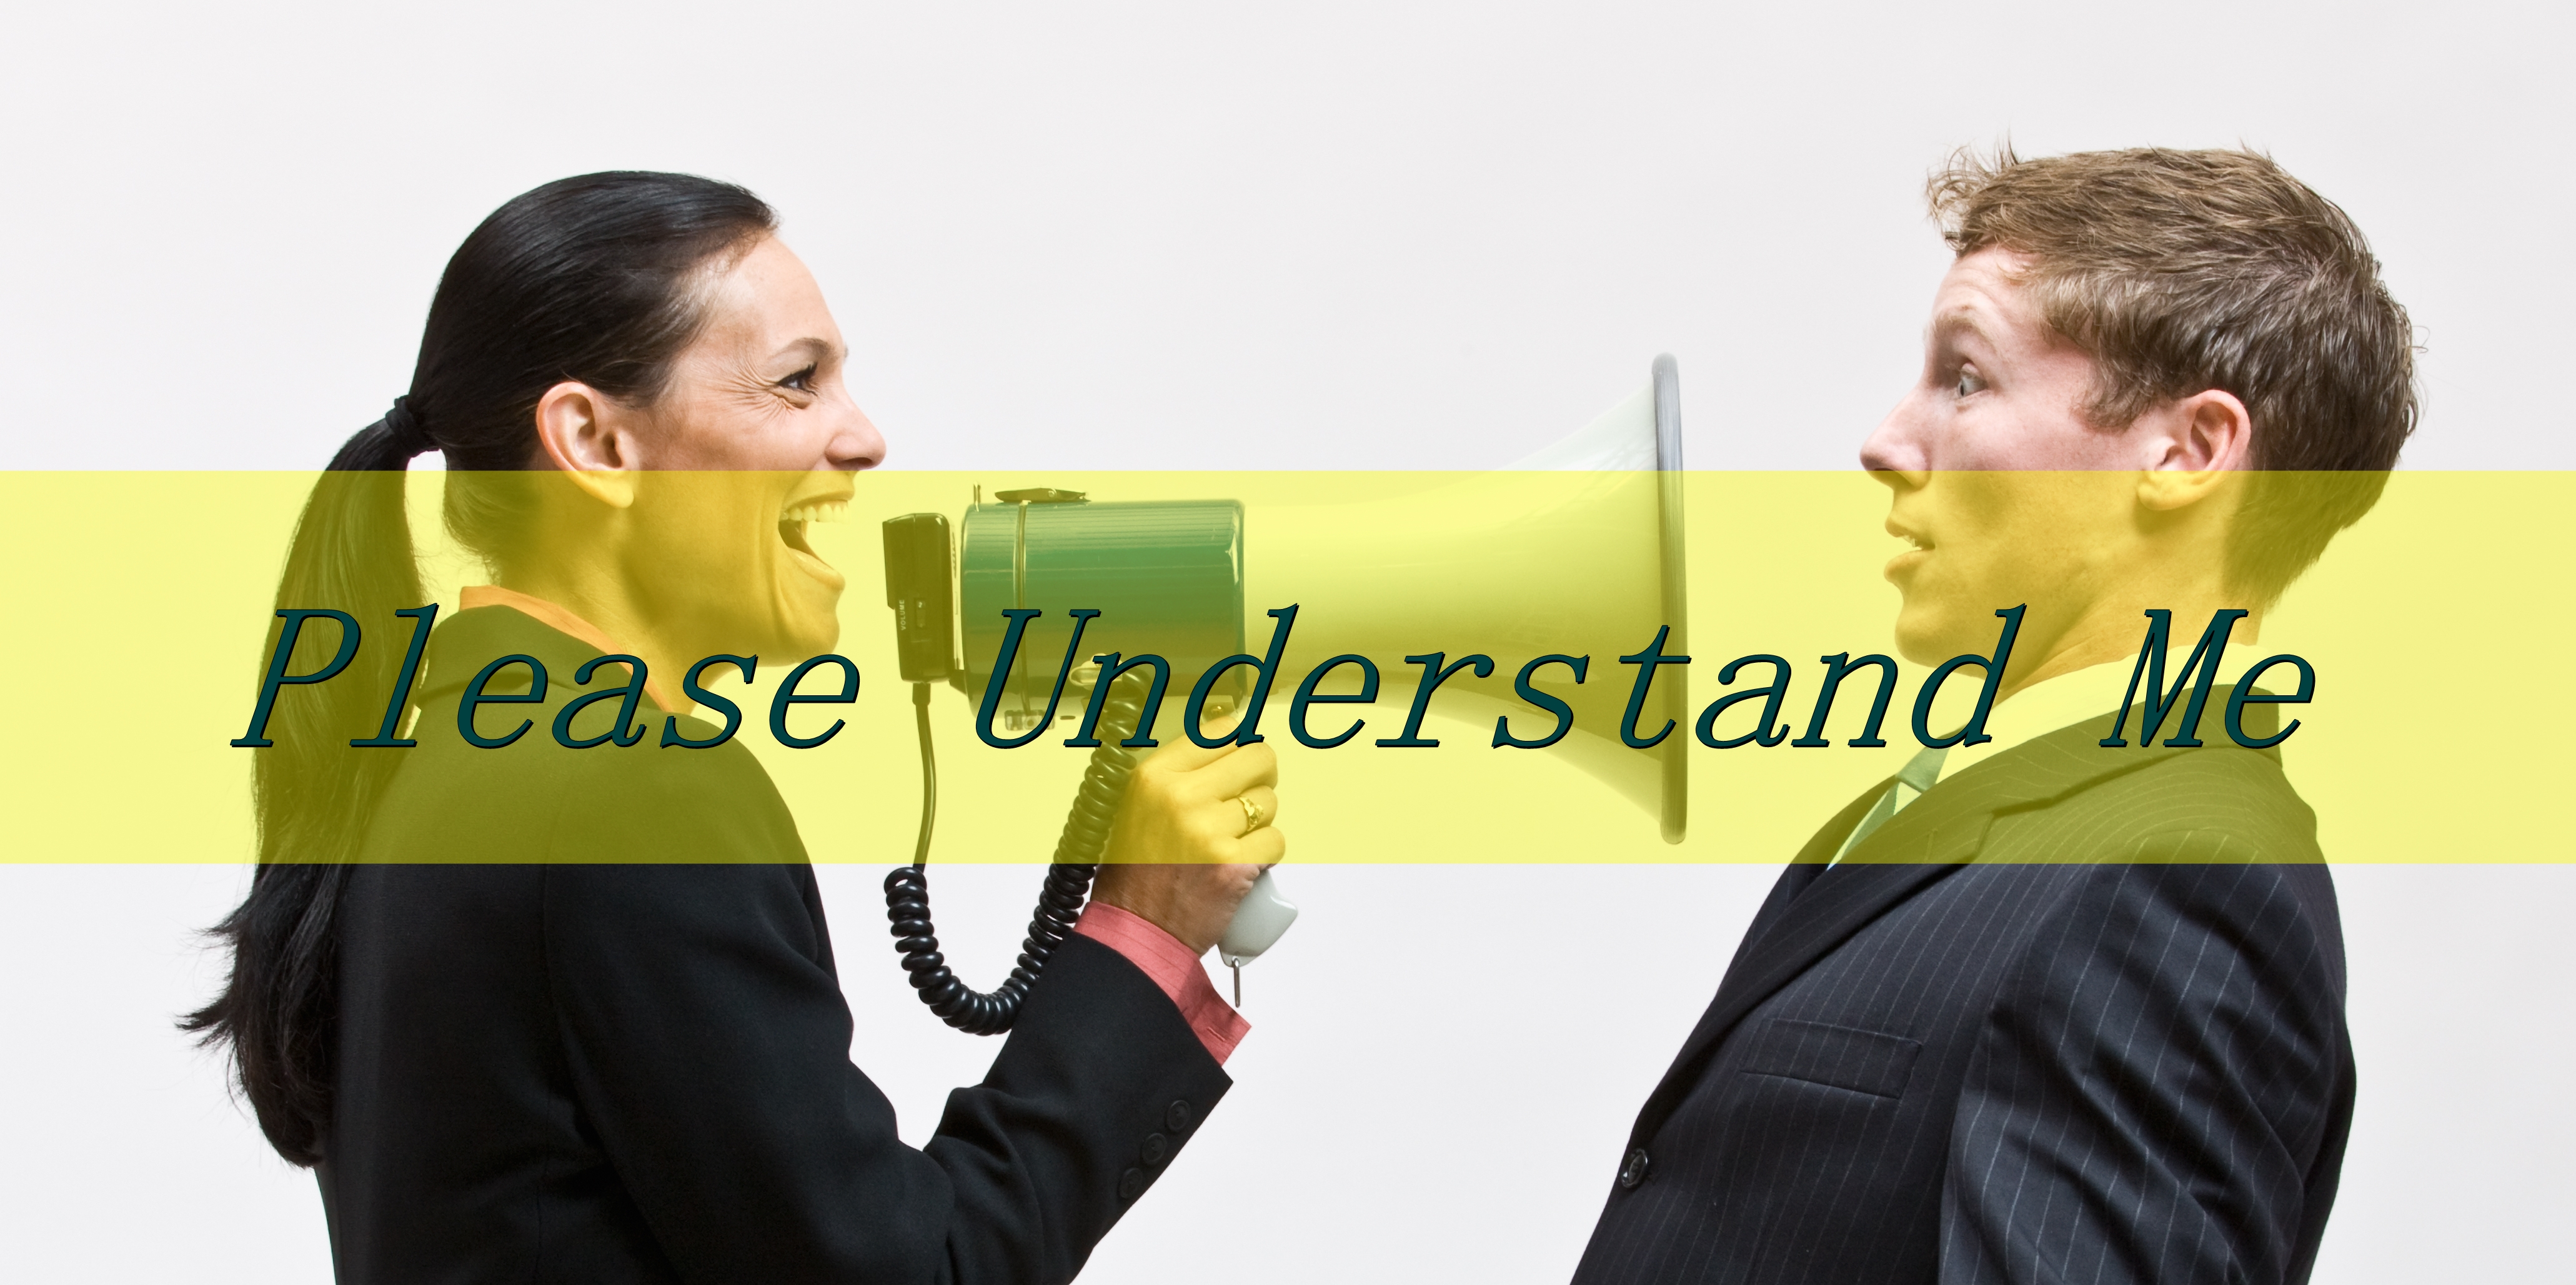 How Can I Communicate Effectively?